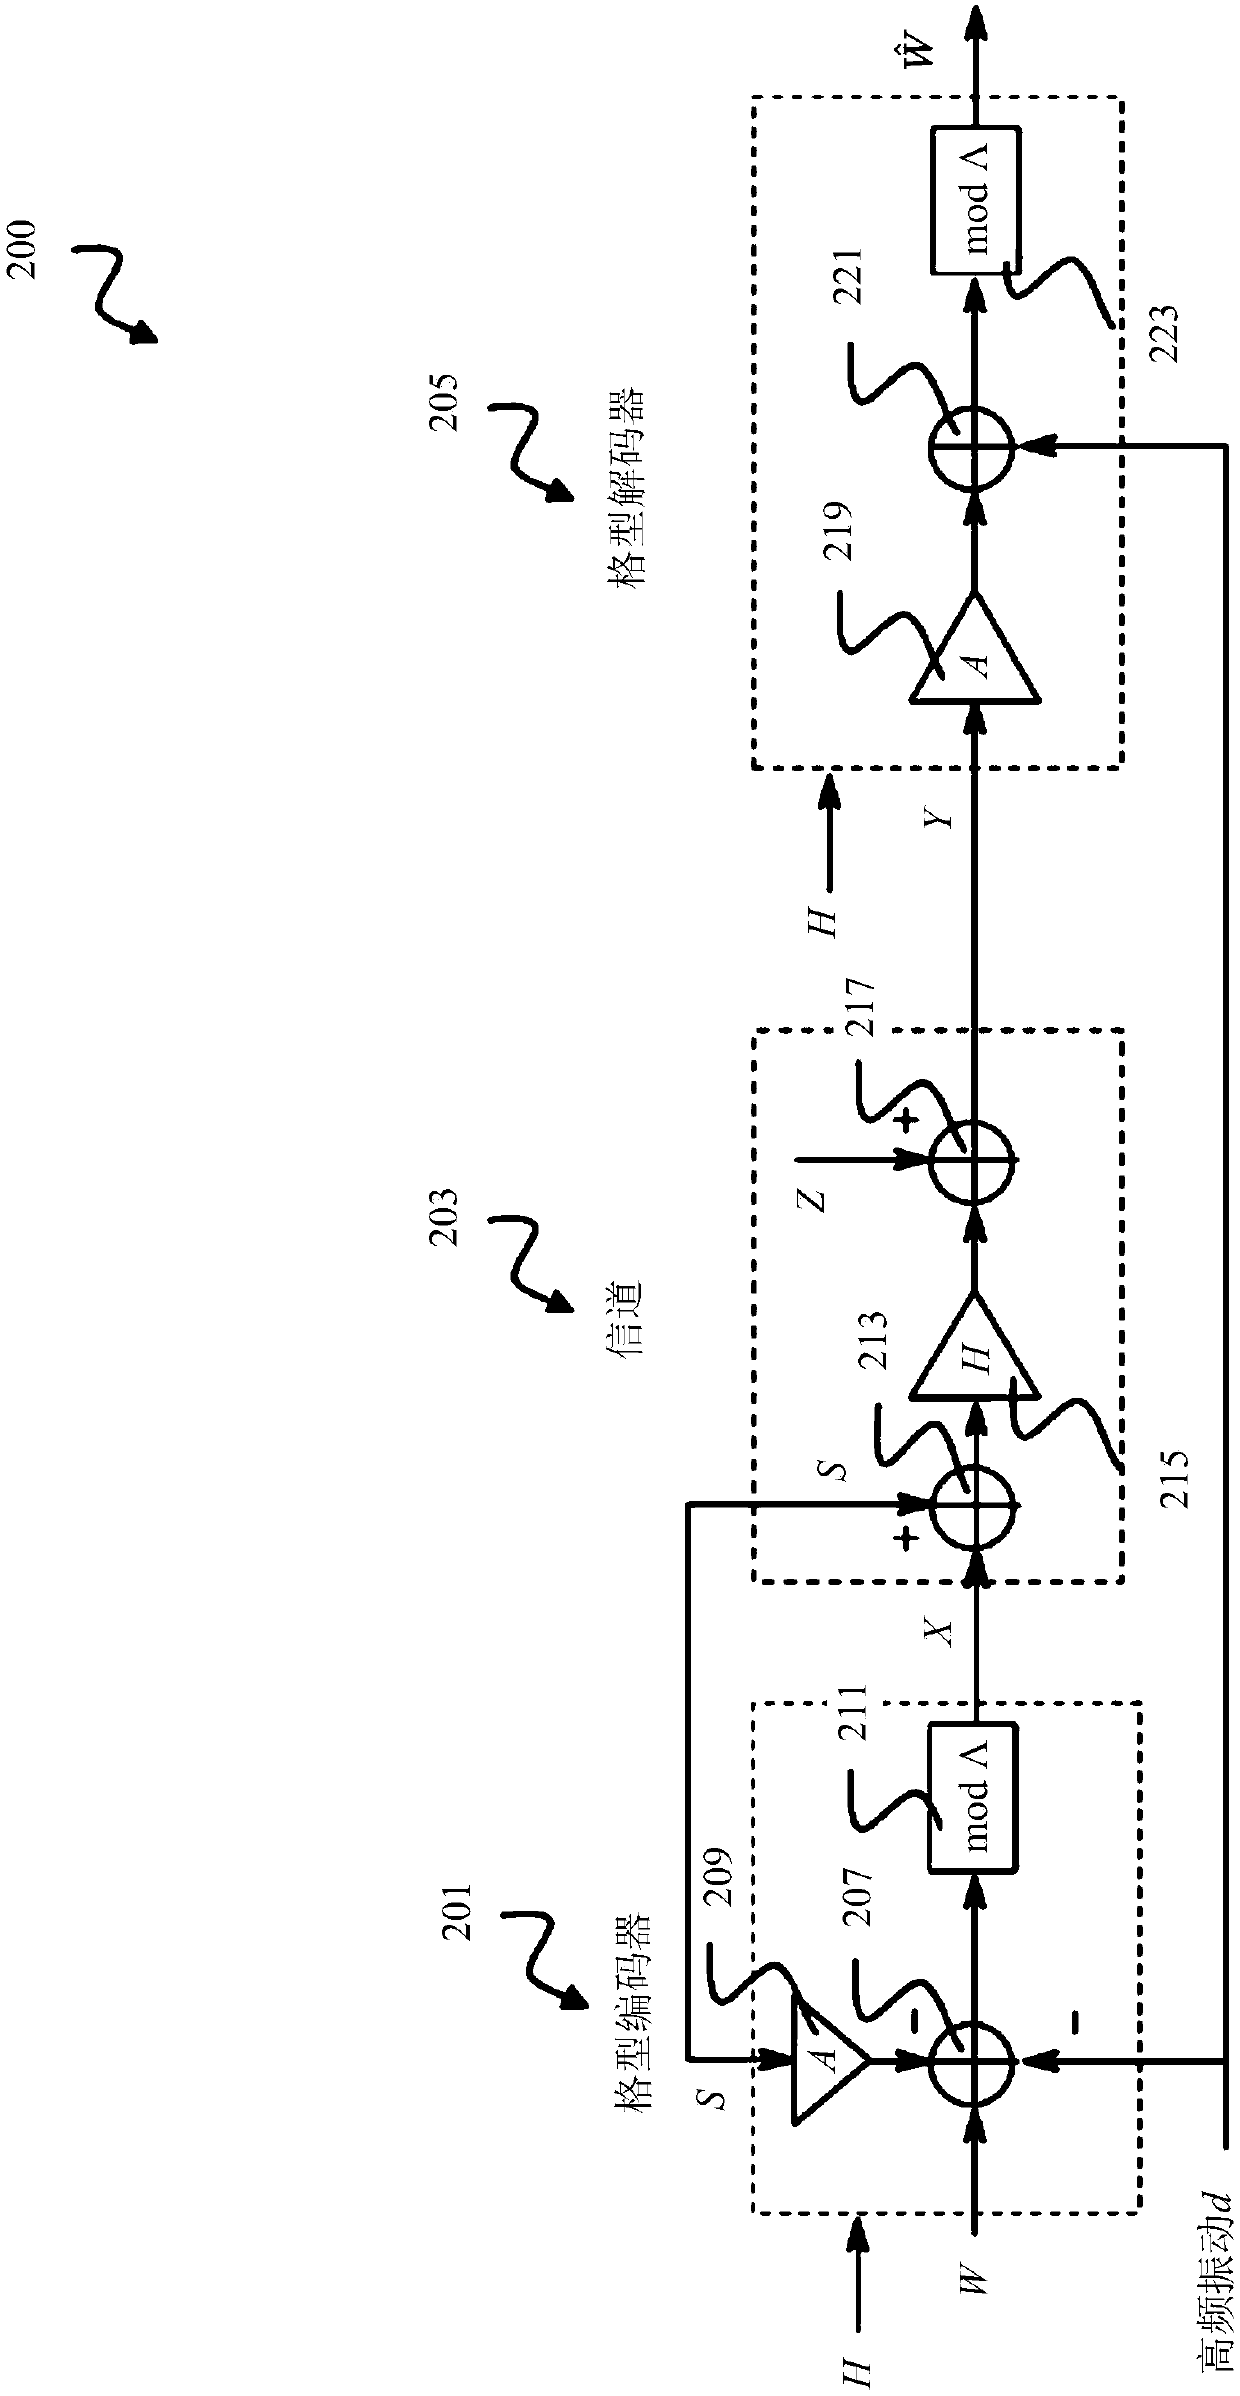 Receiver and precoding system using asymmetric imperfect channel knowledge